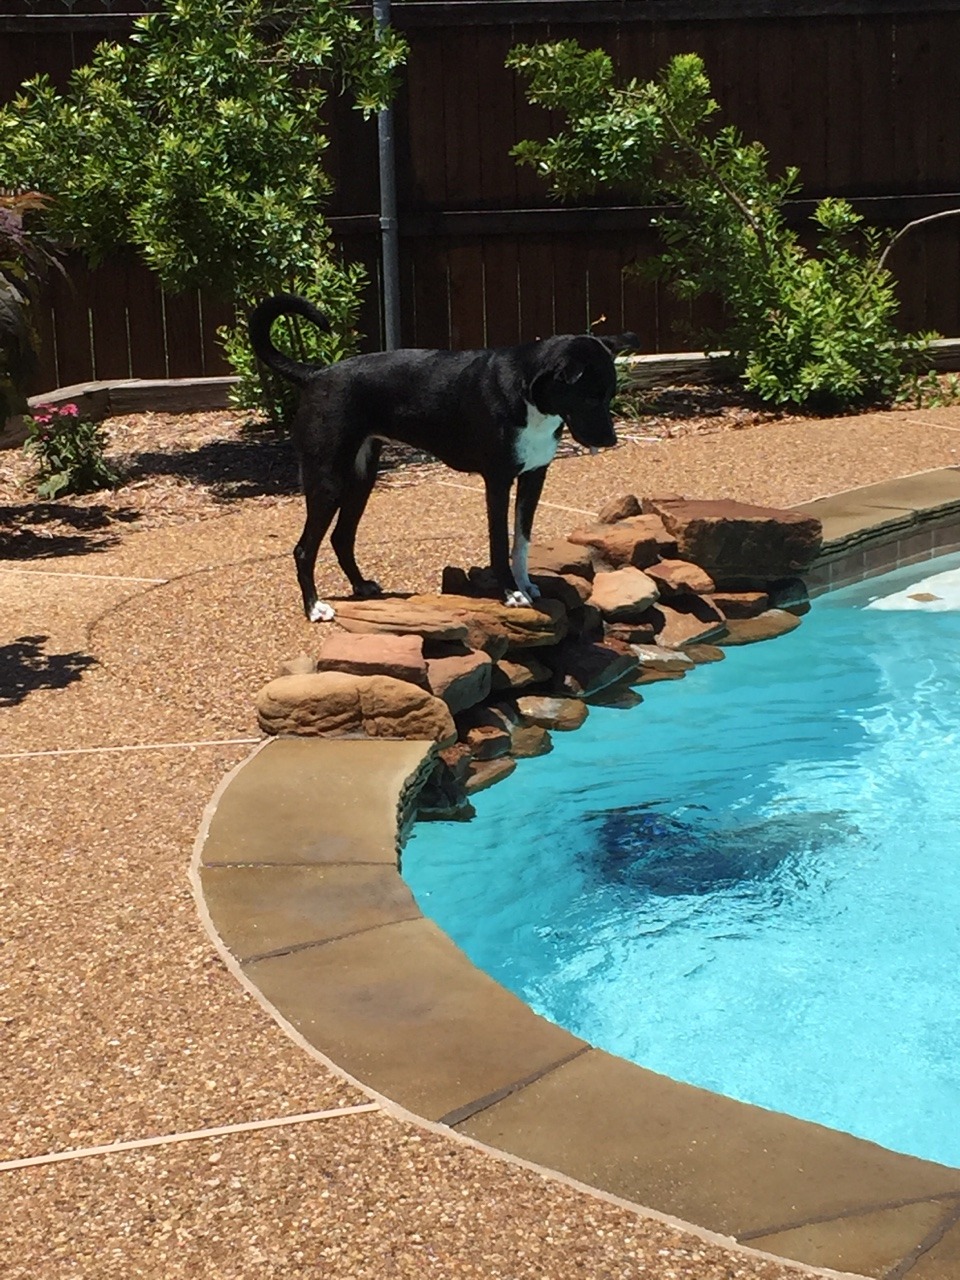 handsomedogs:  Mia loves chasing the Polaris around. She just learned how to swim